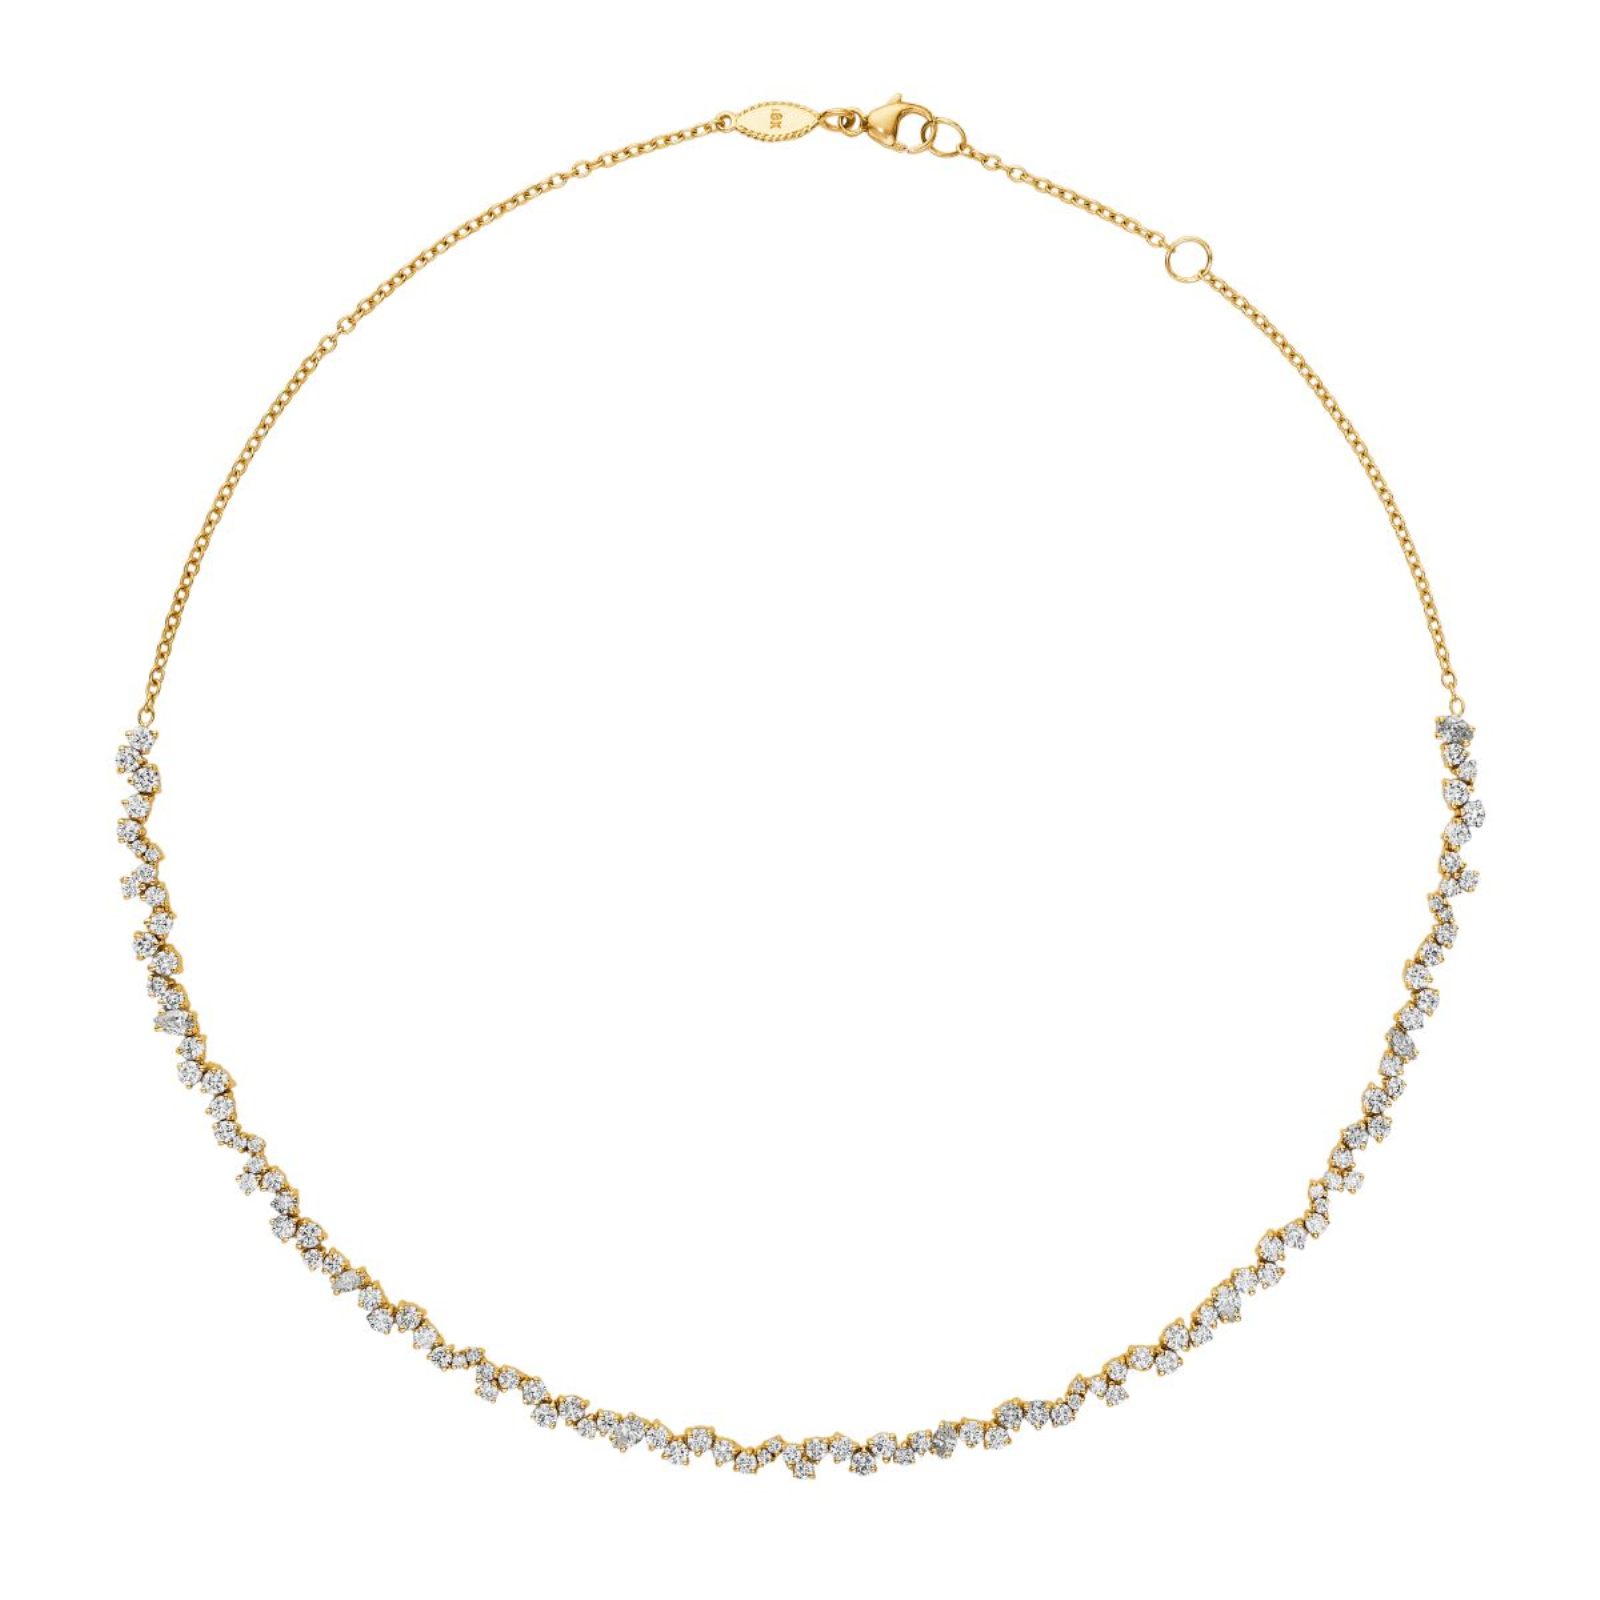 GOLD AND DIAMOND STARDUST NECKLACE